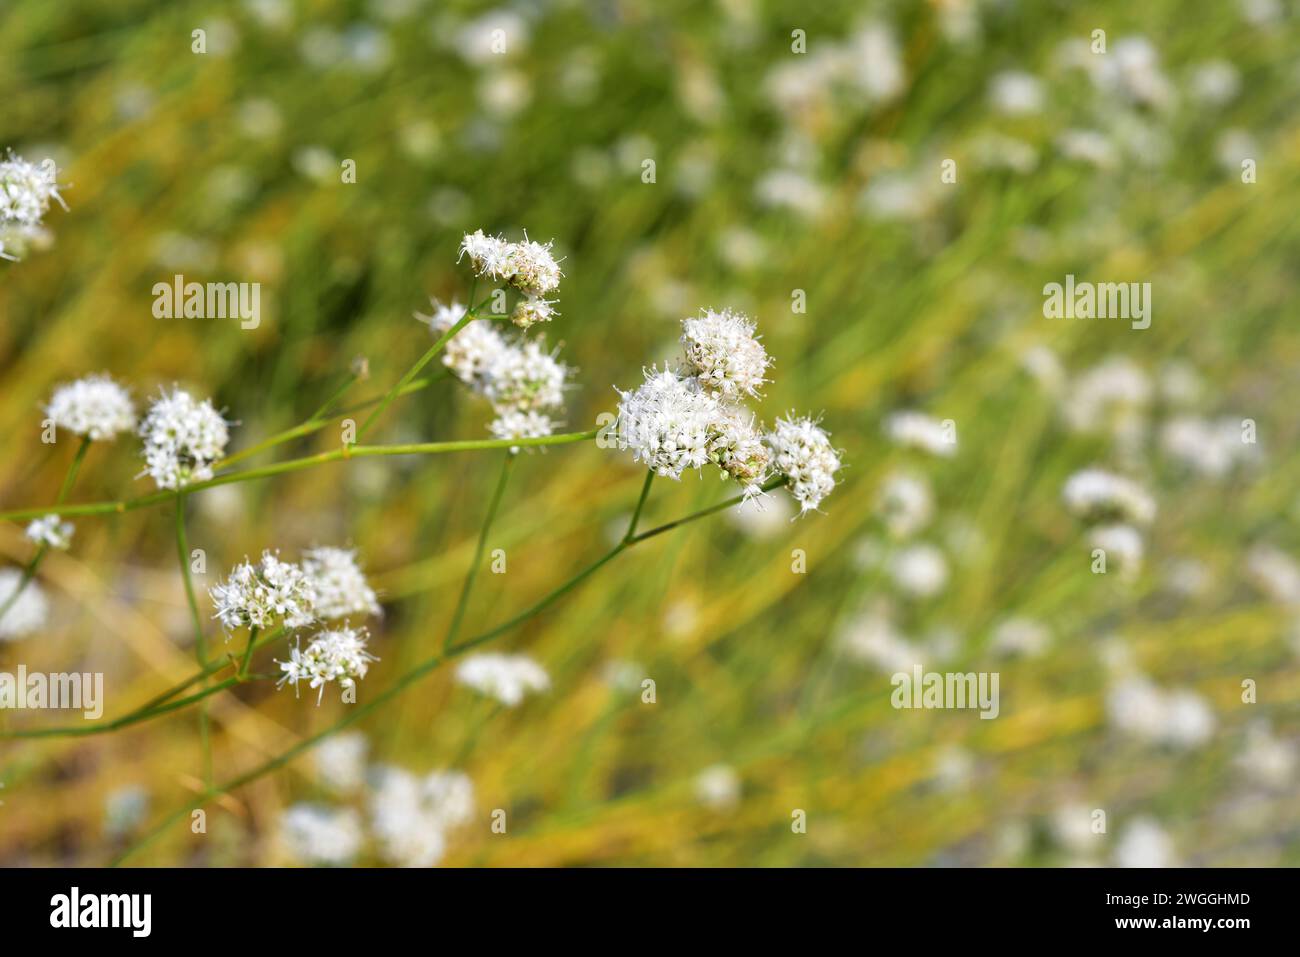 Albada or jabonera (Gypsophyla struthium) is a perennial herb native to gypsaceous soils of Spain. Flowering plant. Stock Photo